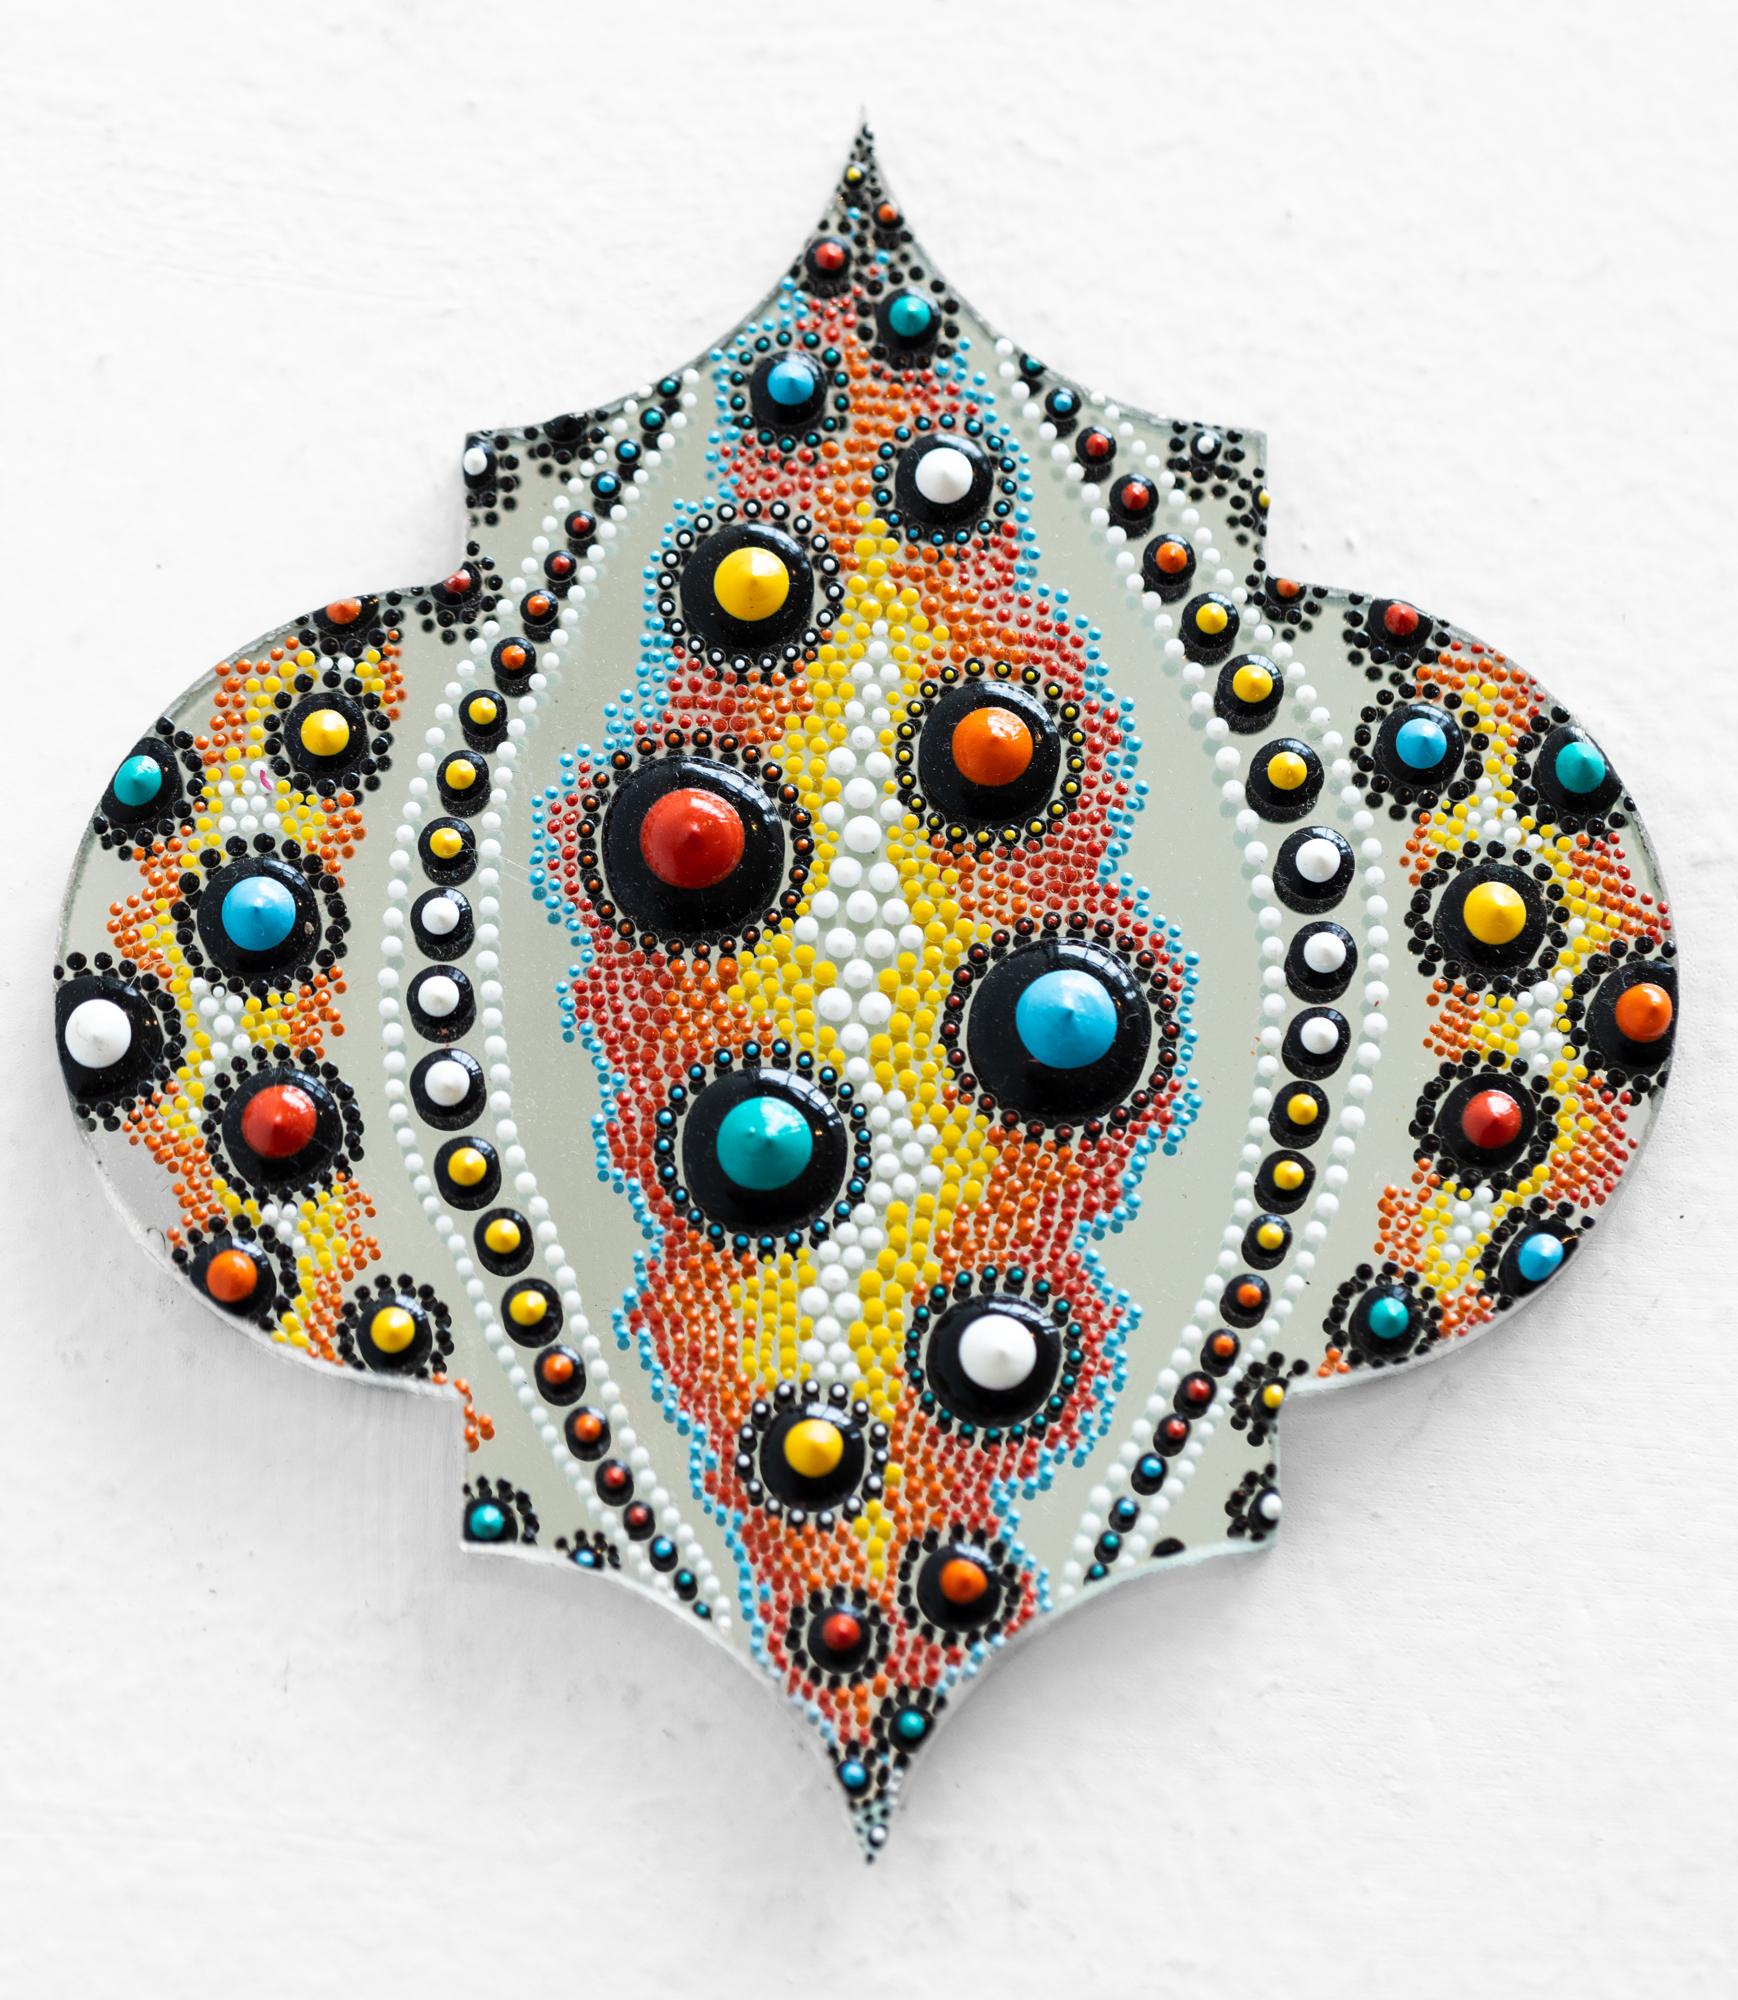 "Primary Urchin" Colorful, decorative patterns with dimensional paint on glass